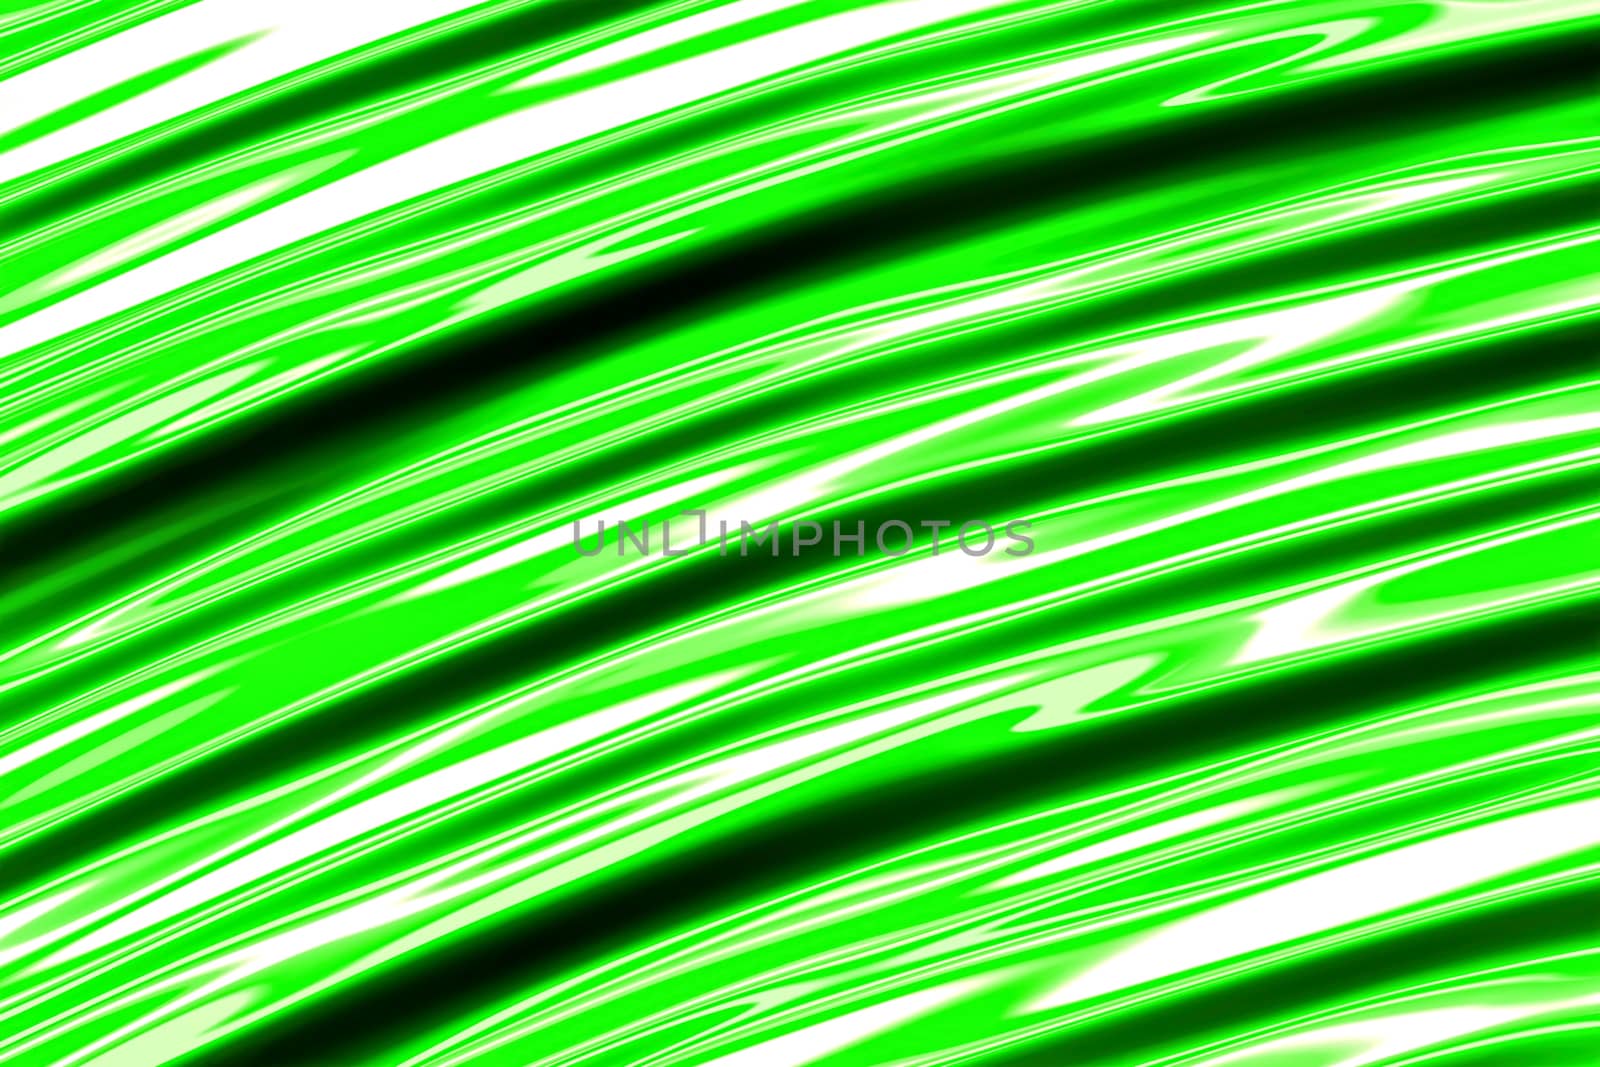 Abstract striped background - computer-generated image. Fractal geometry: glossy stripes and folds. For ecology or business design projects.